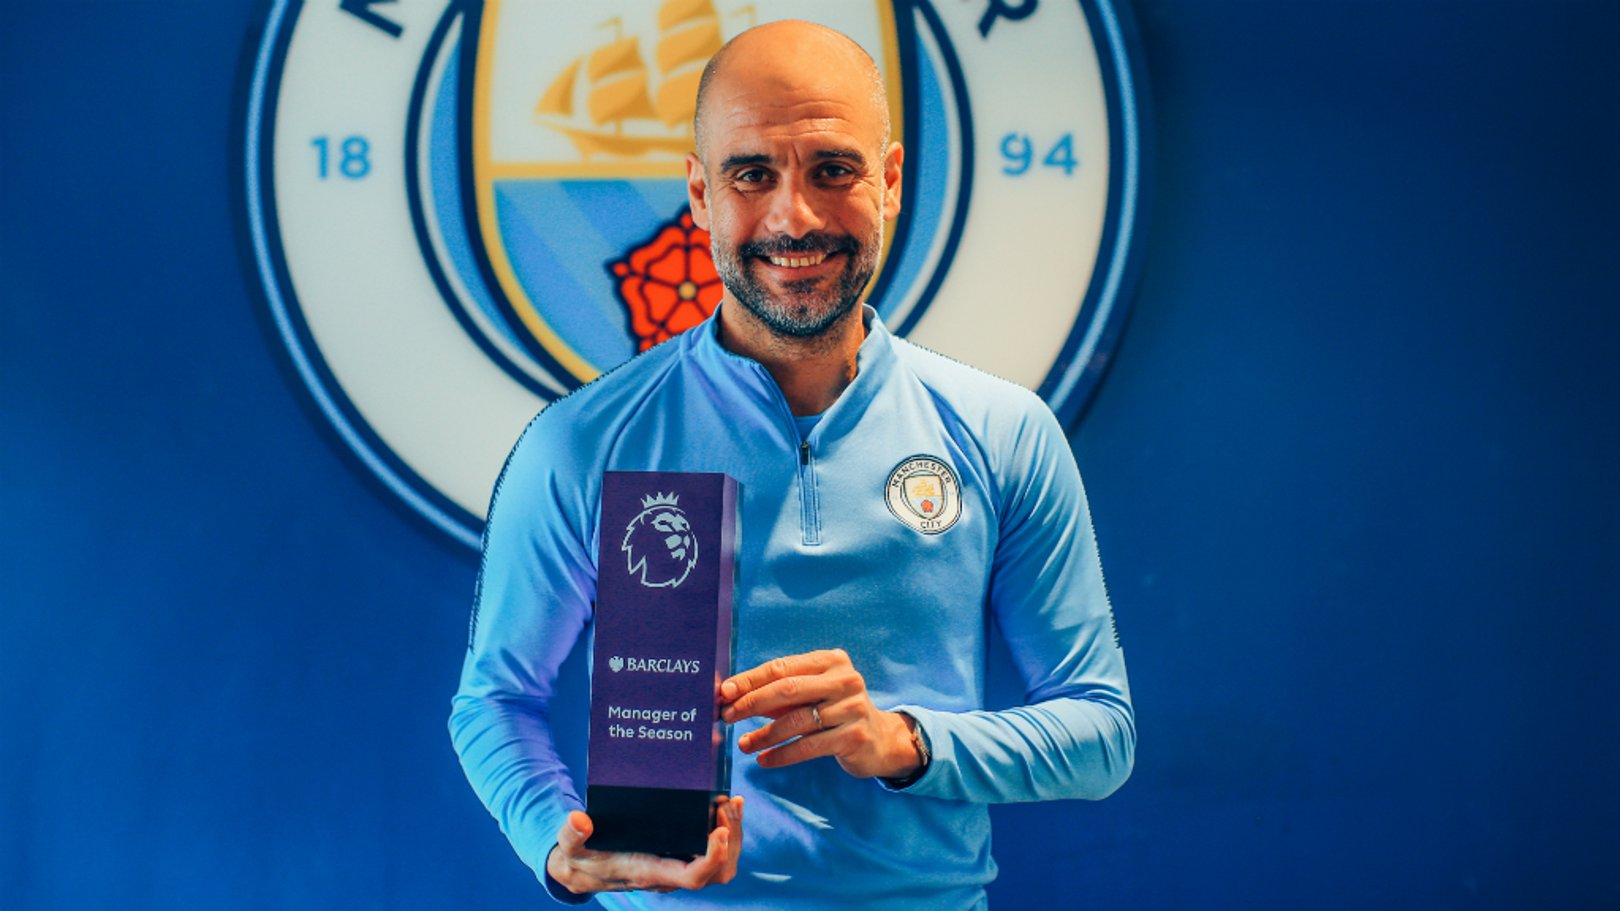 Pep named Premier League Manager of the Season